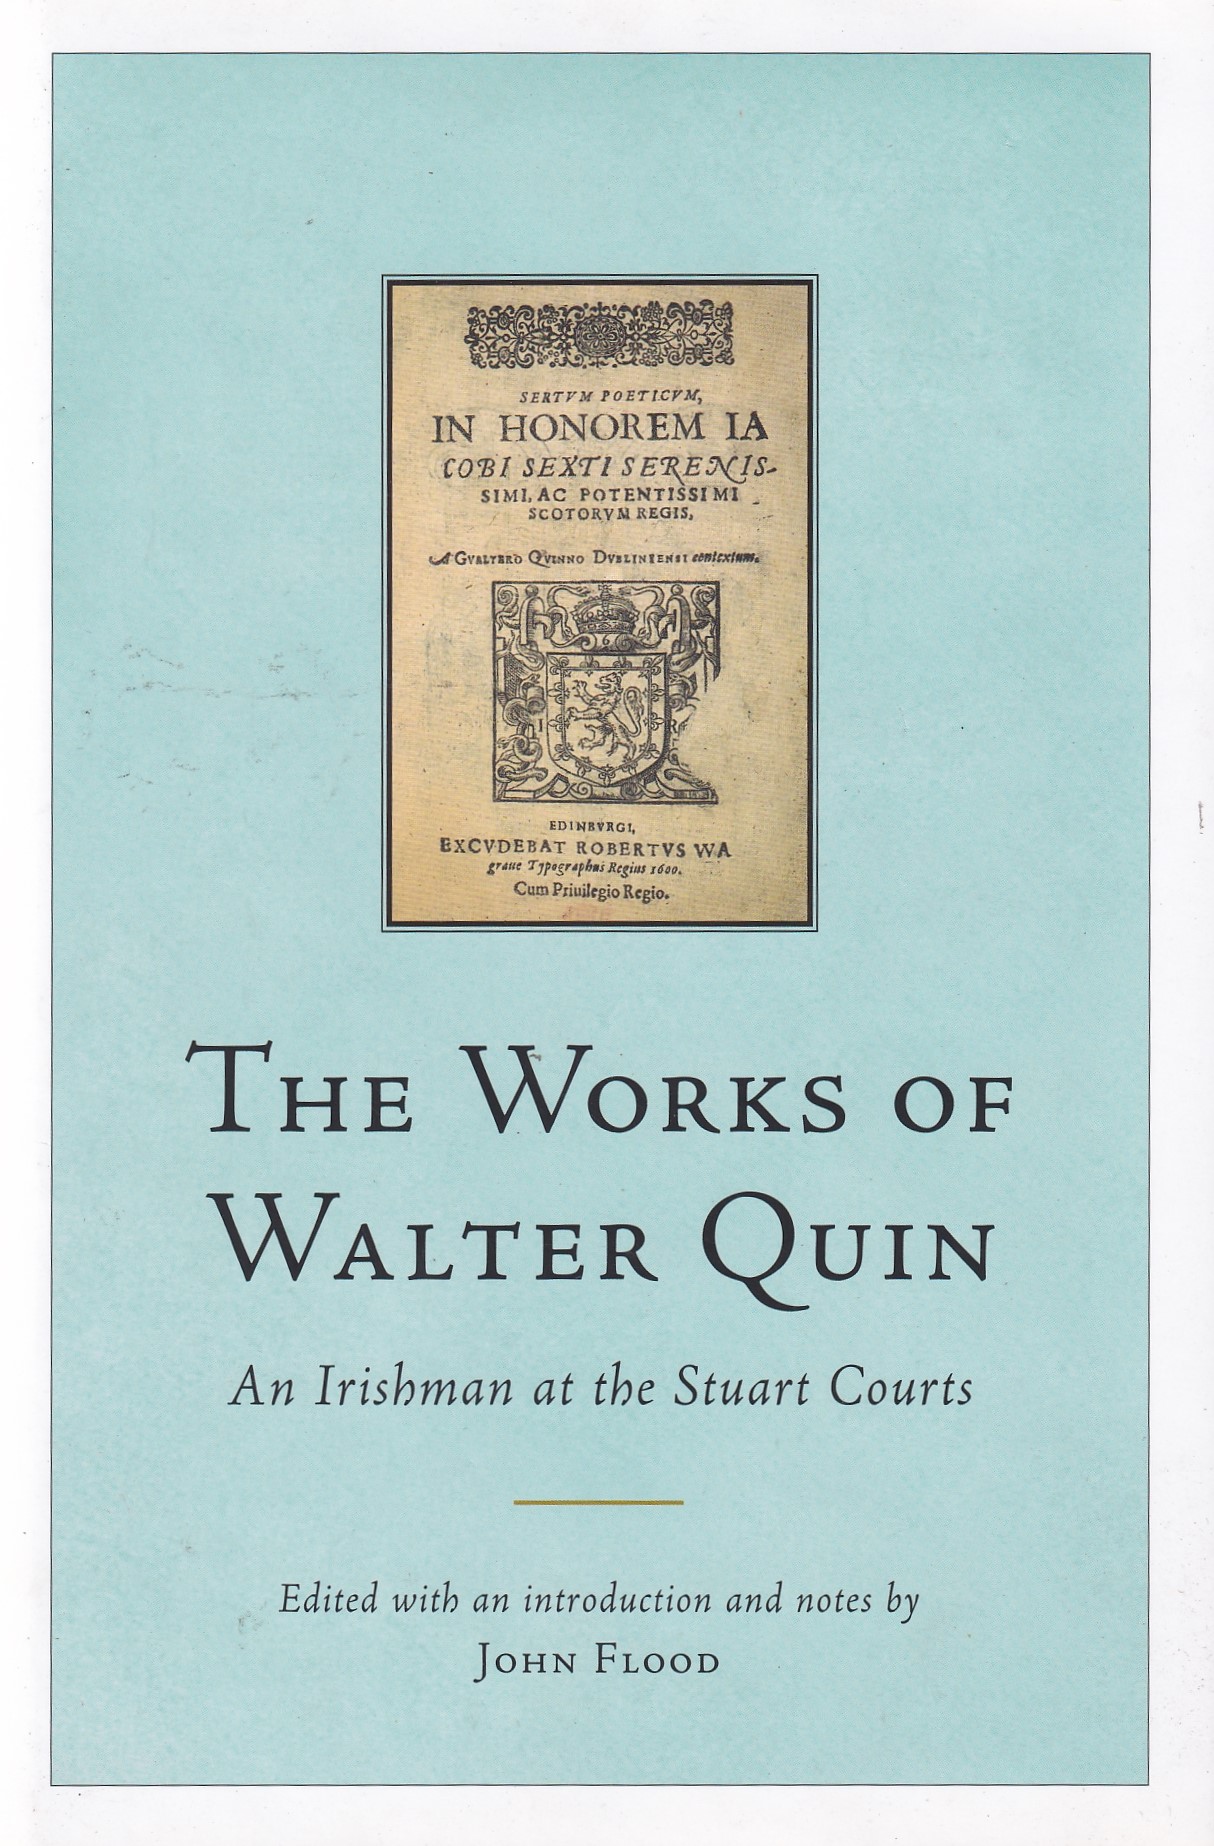 The Works of Walter Quin: An Irishman at the Stuart Courts by John Flood